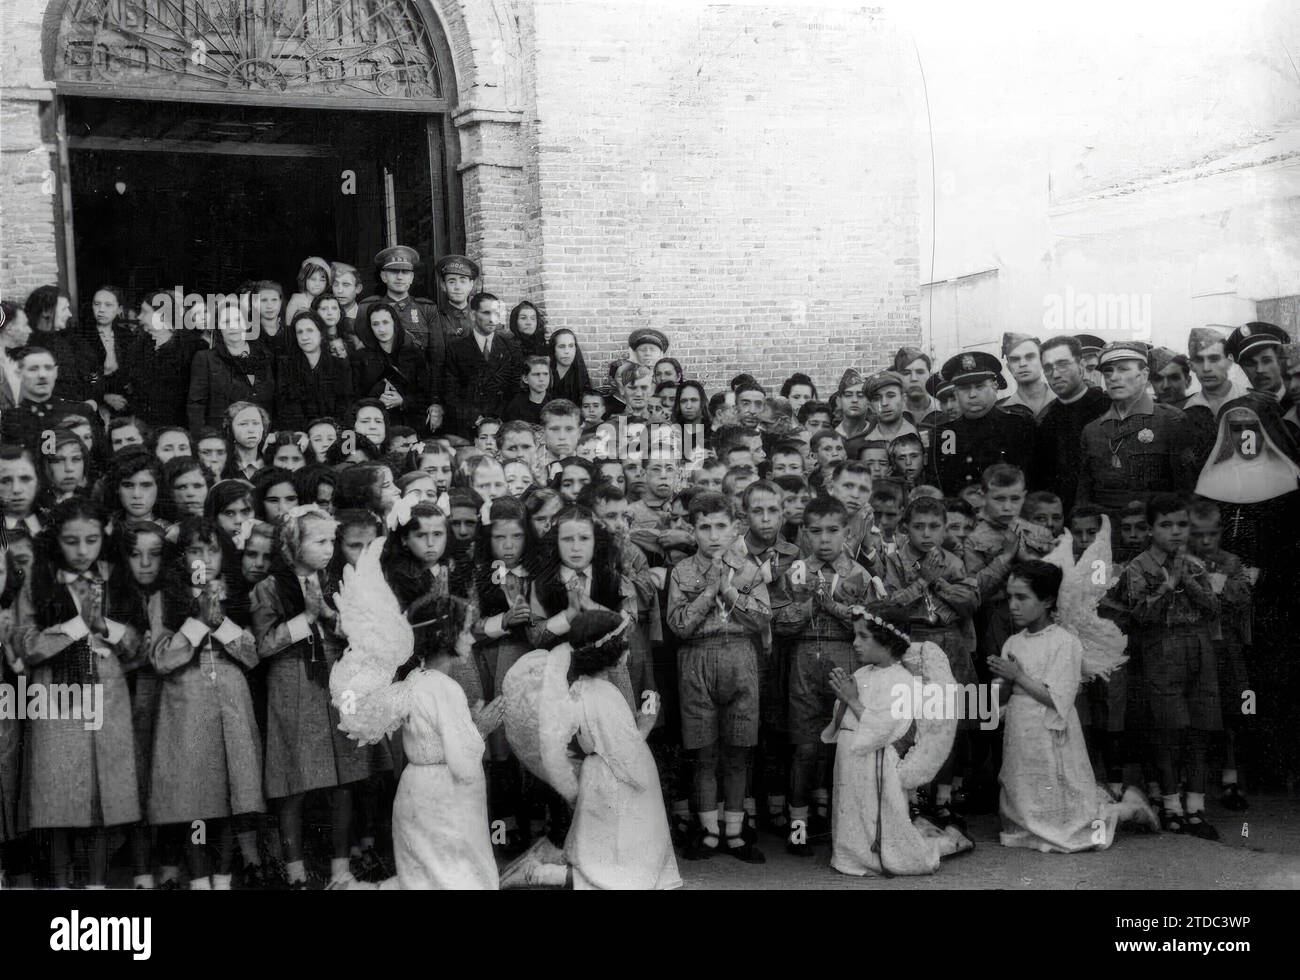 06/02/1942. In the church of Dulce Nombre de María, in the Las Latas neighborhood, the first communion was given yesterday to the children of that parish, with General Millan Astray presiding over the event. Credit: Album / Archivo ABC / Virgilio Muro Stock Photo